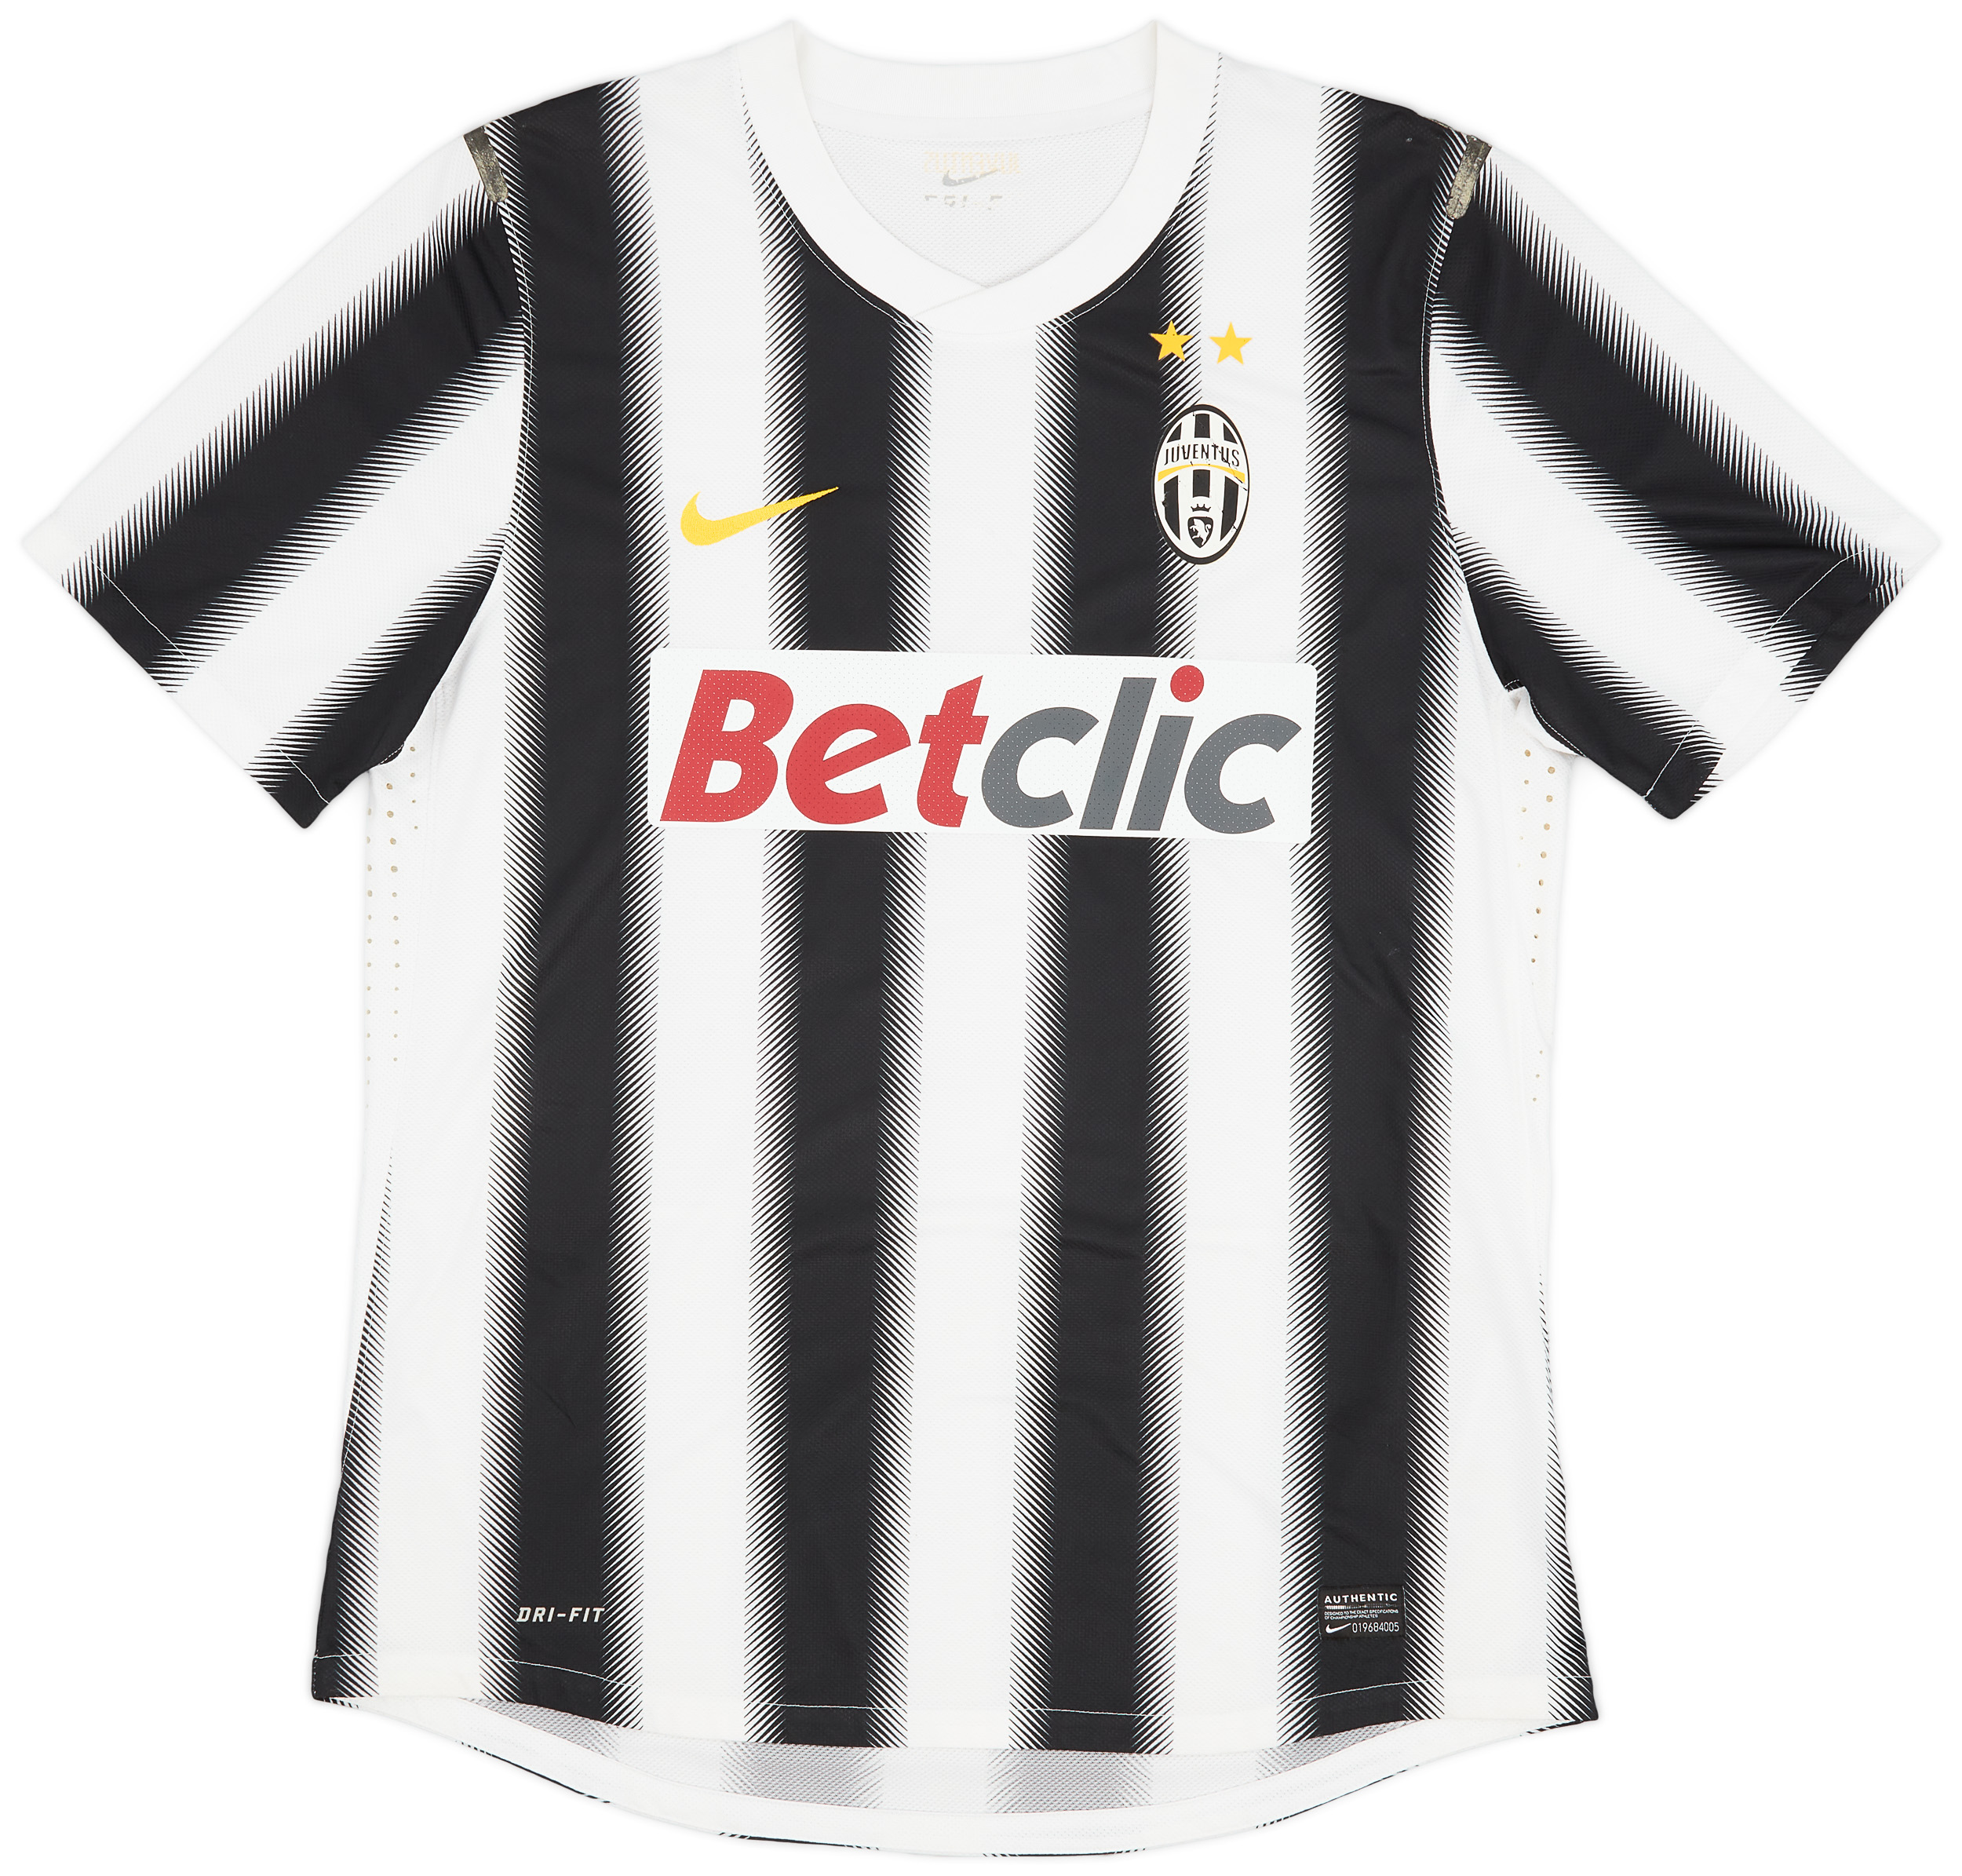 2011-12 Juventus Player Issue Home Shirt - 6/10 - ()